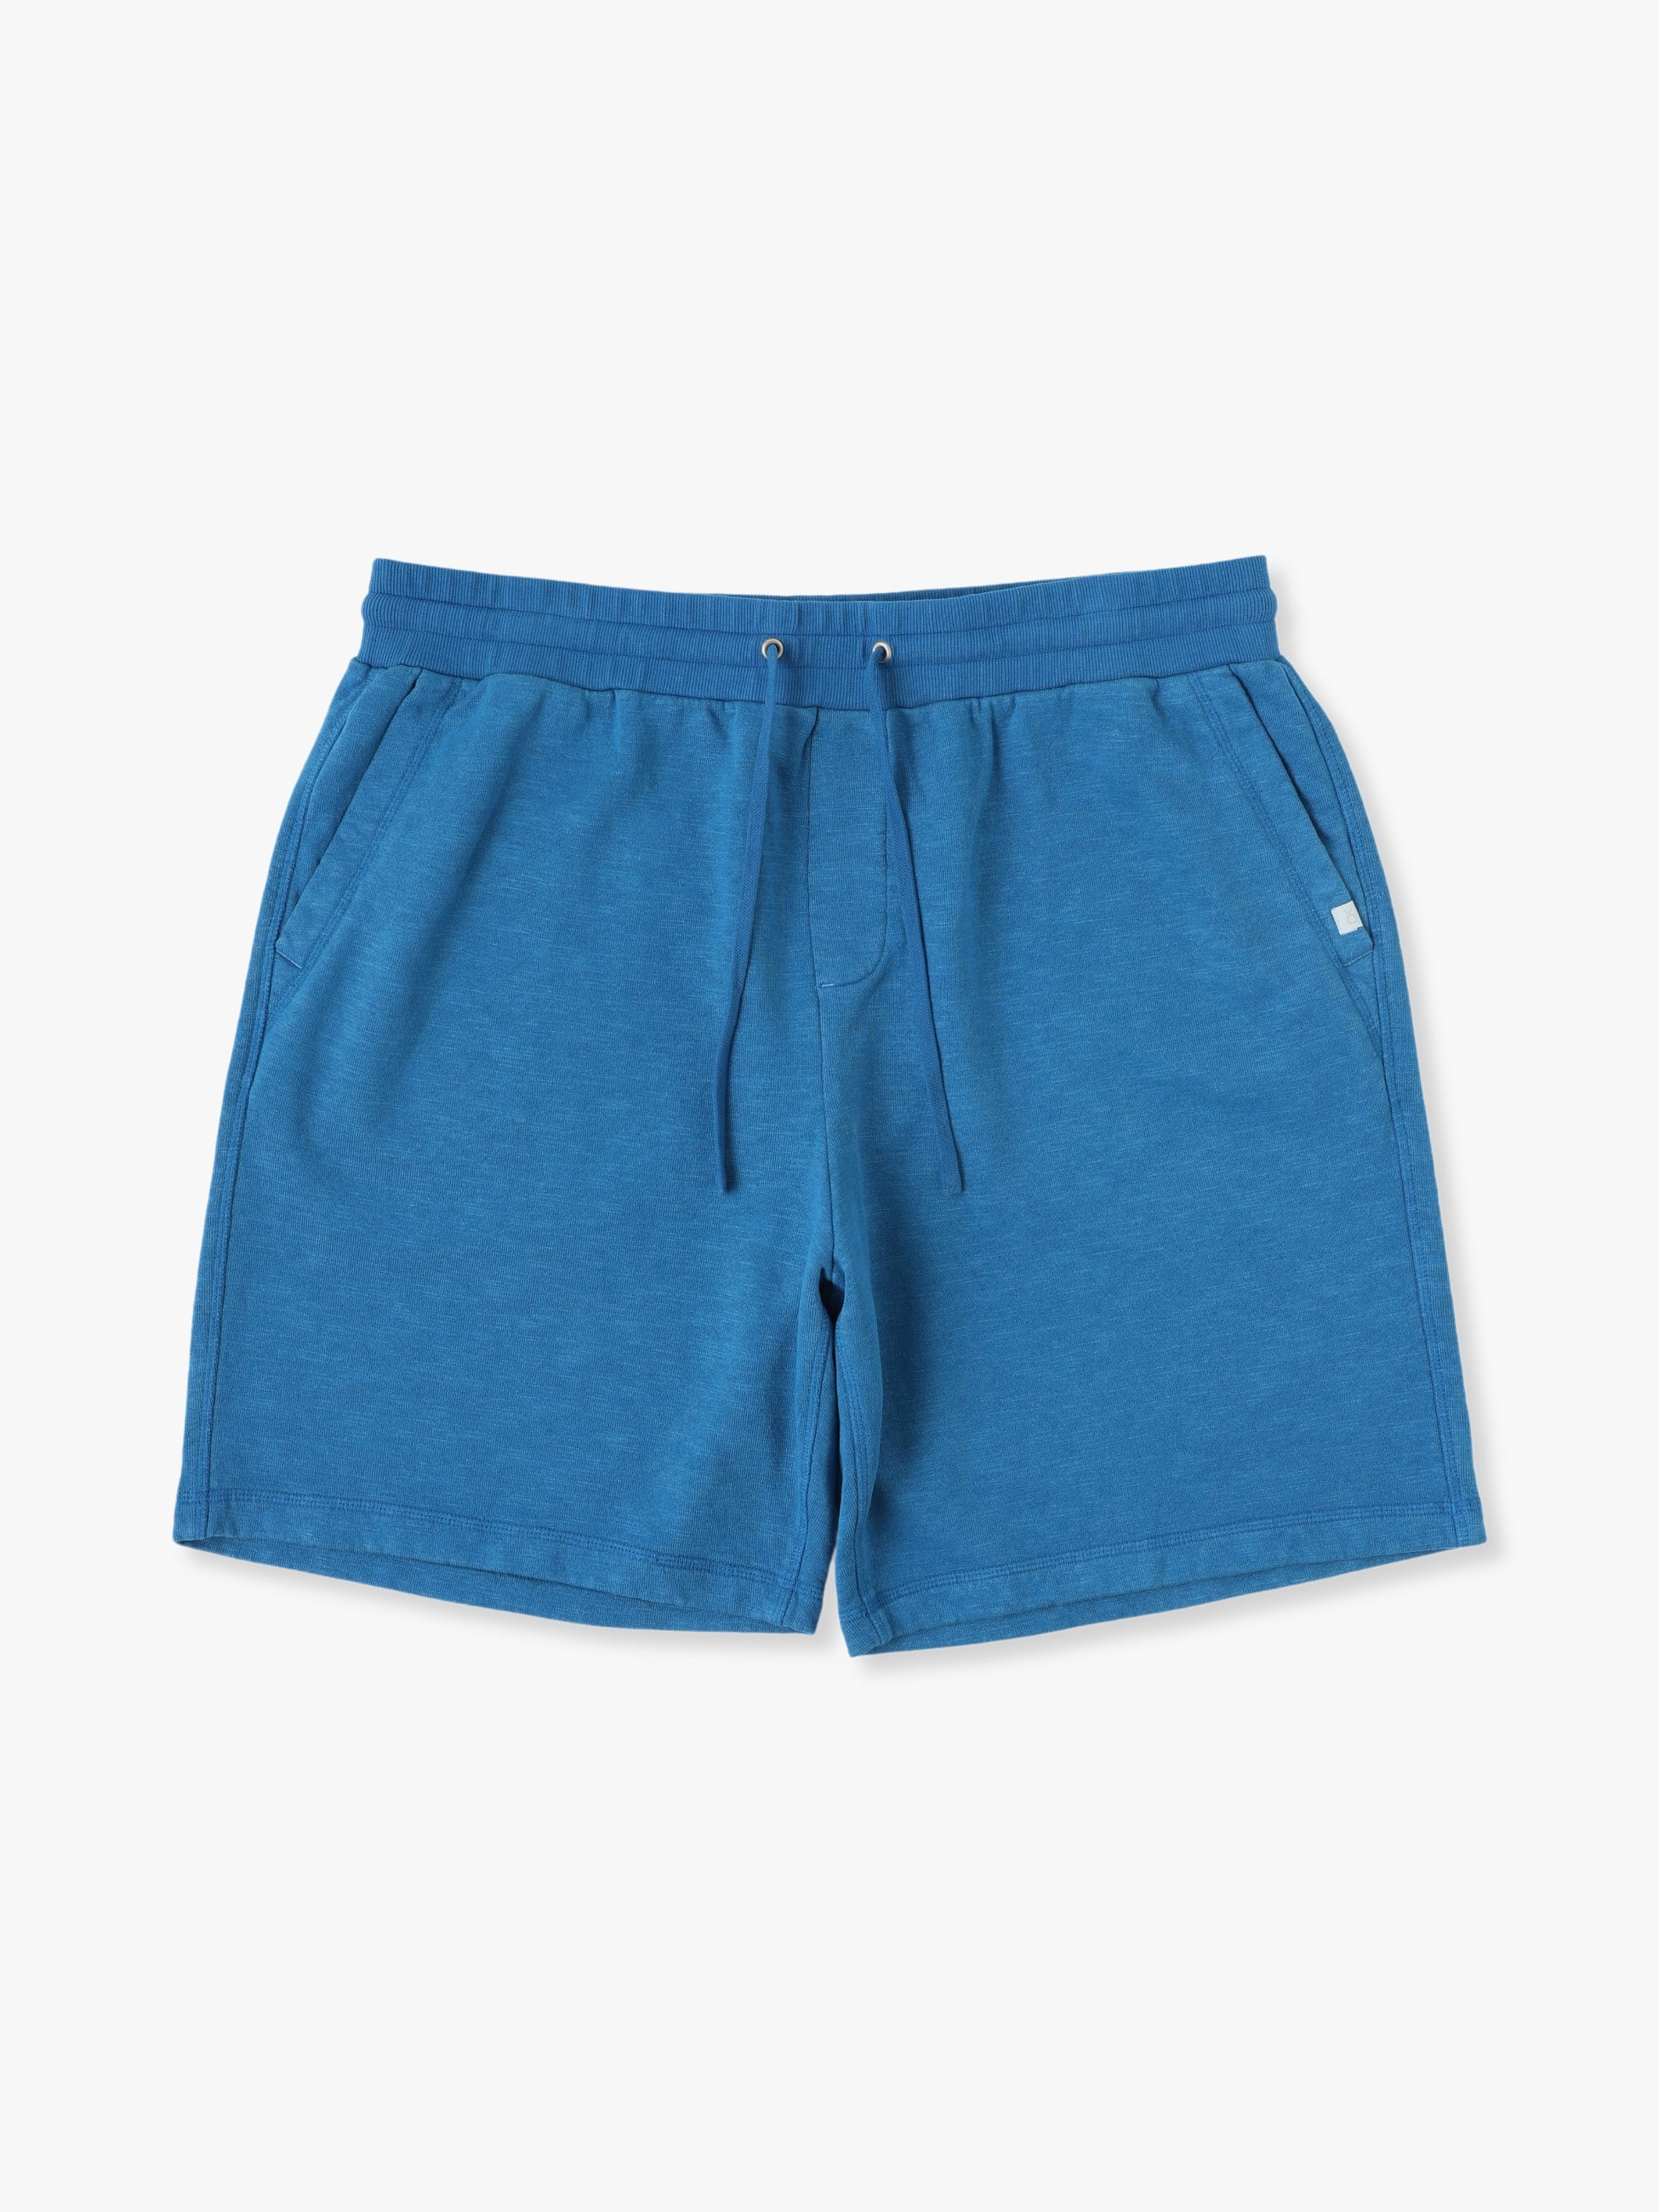 OUTERKNOWN Sweat Shorts ロンハーマン